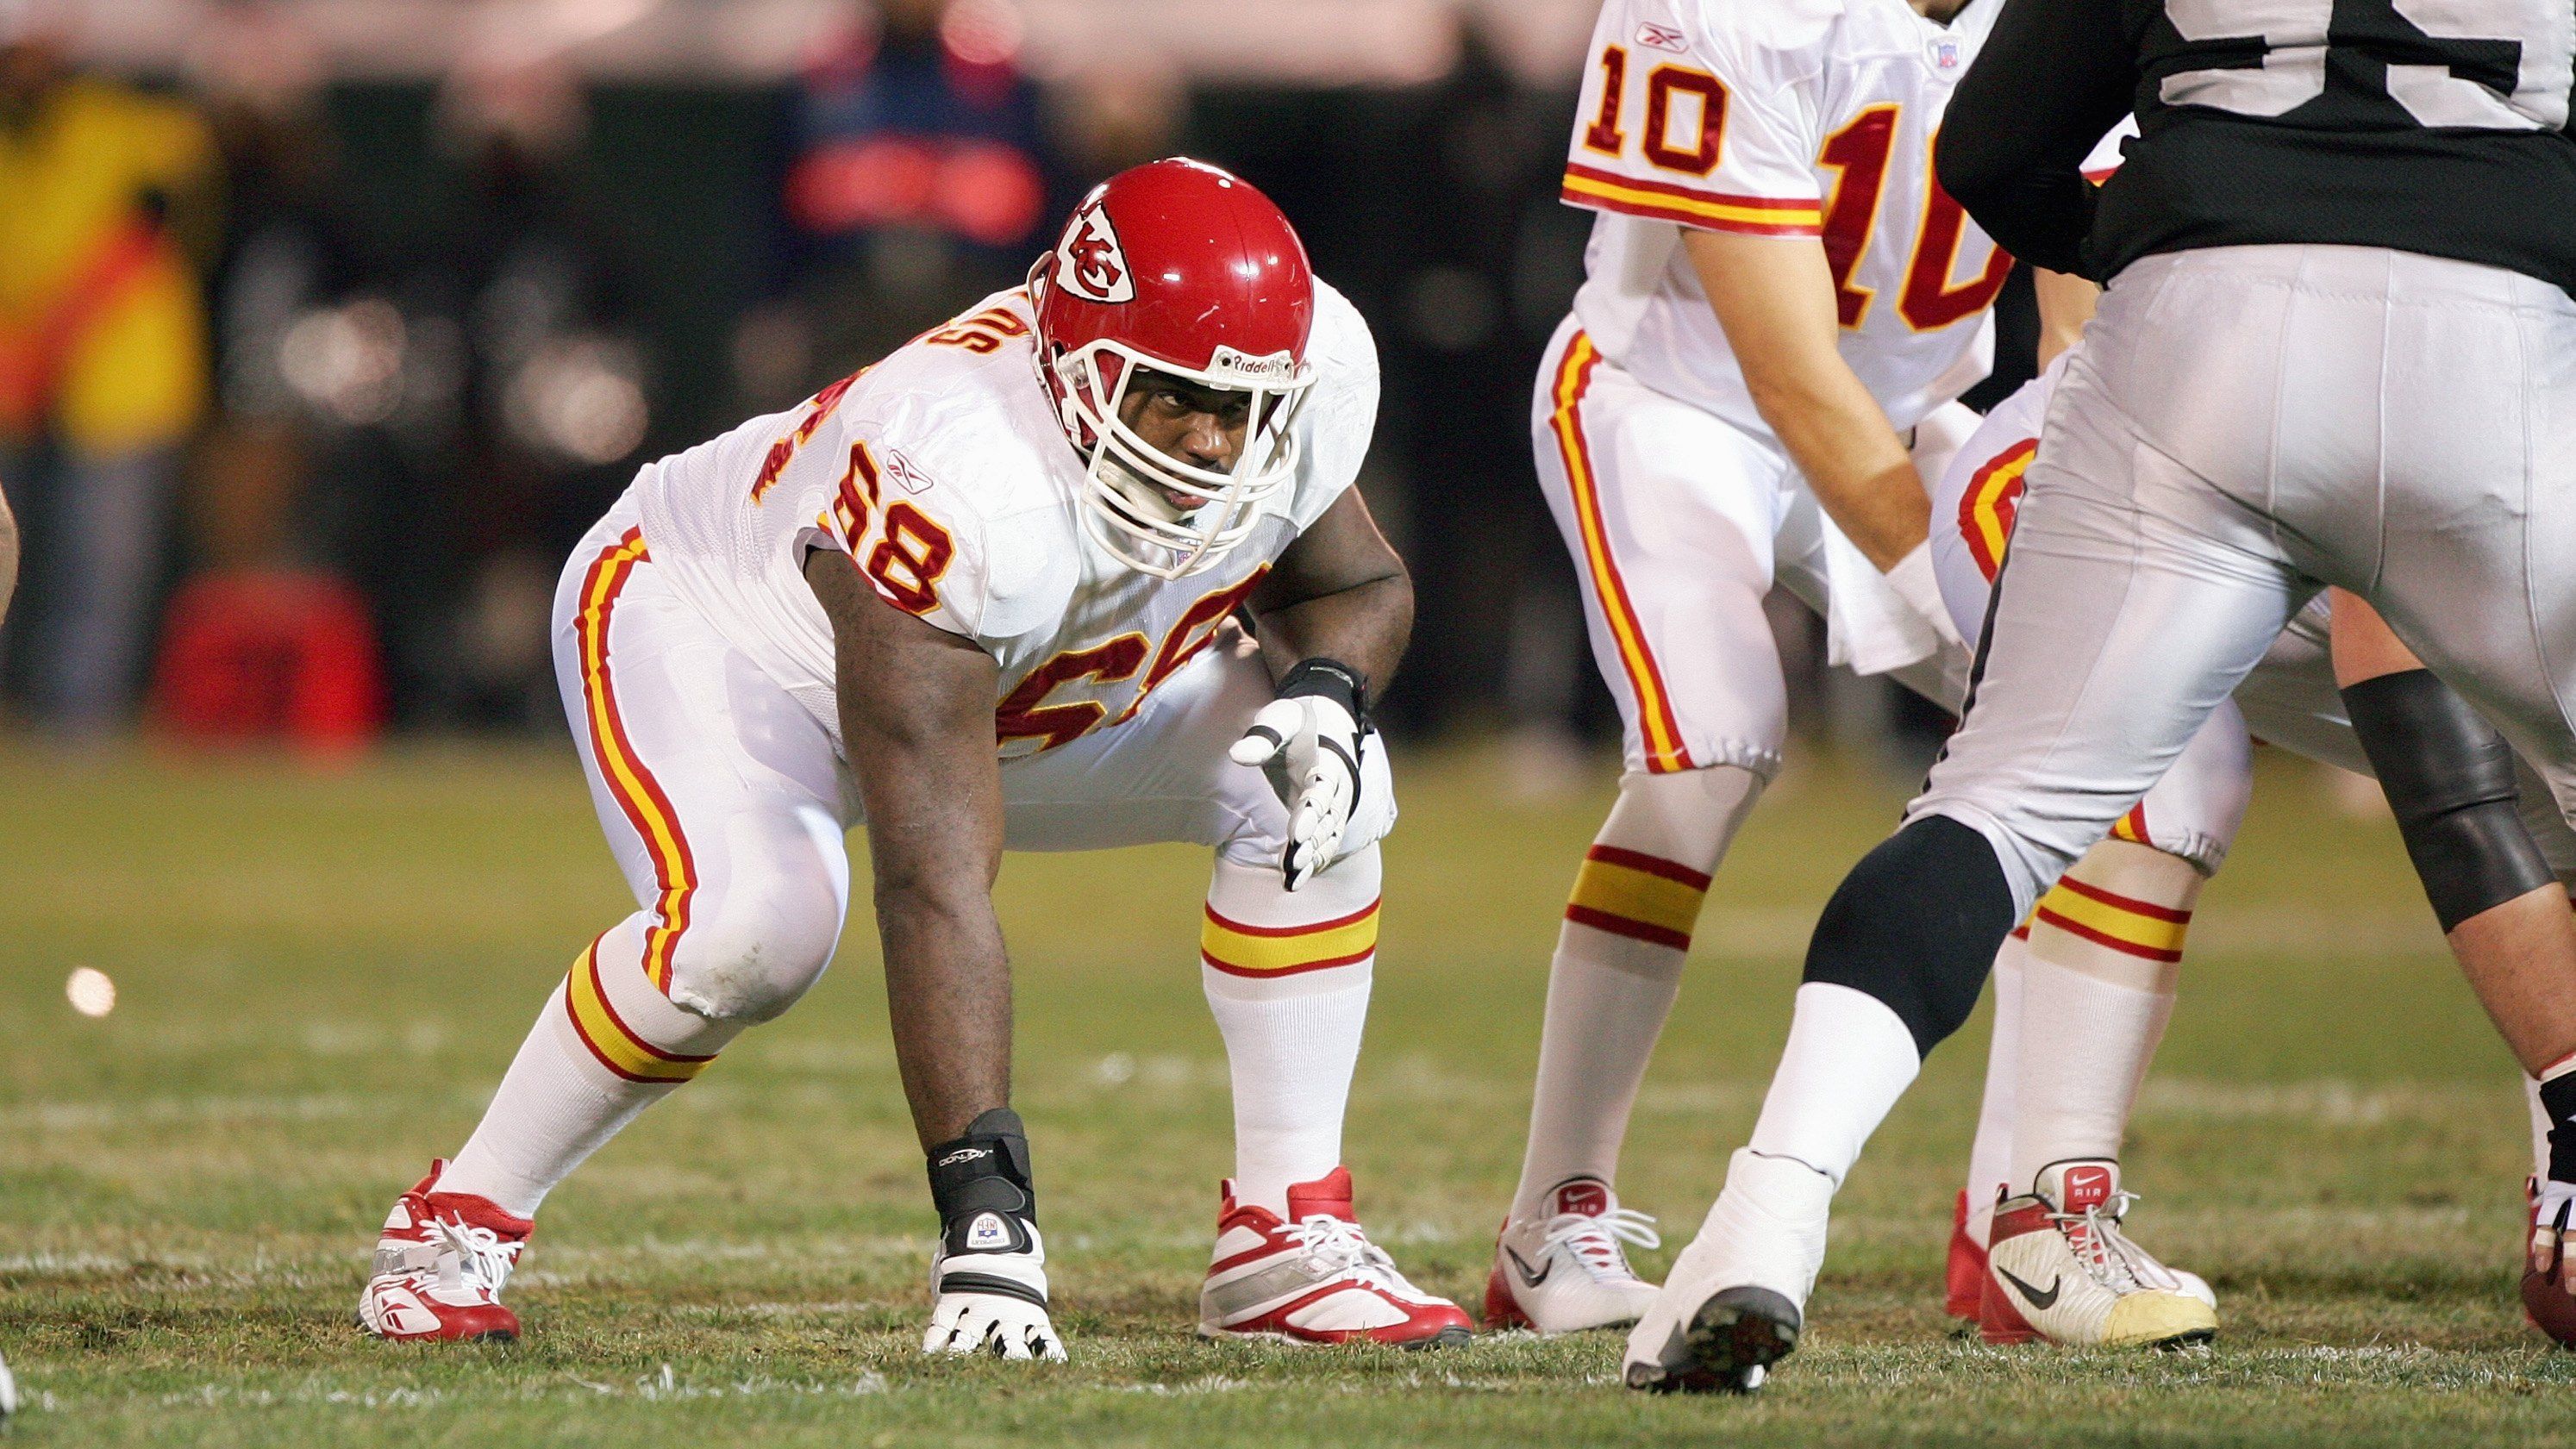 <strong>68: Will Shields</strong><br>Team: Kansas City Chiefs<br>Position: Offensive Guard<br>Erfolge: Pro Football Hall of Famer, siebenmaliger First Team All-Pro, zwölfmaliger Pro Bowler<br>Honorable Mention: Kevin Mawae